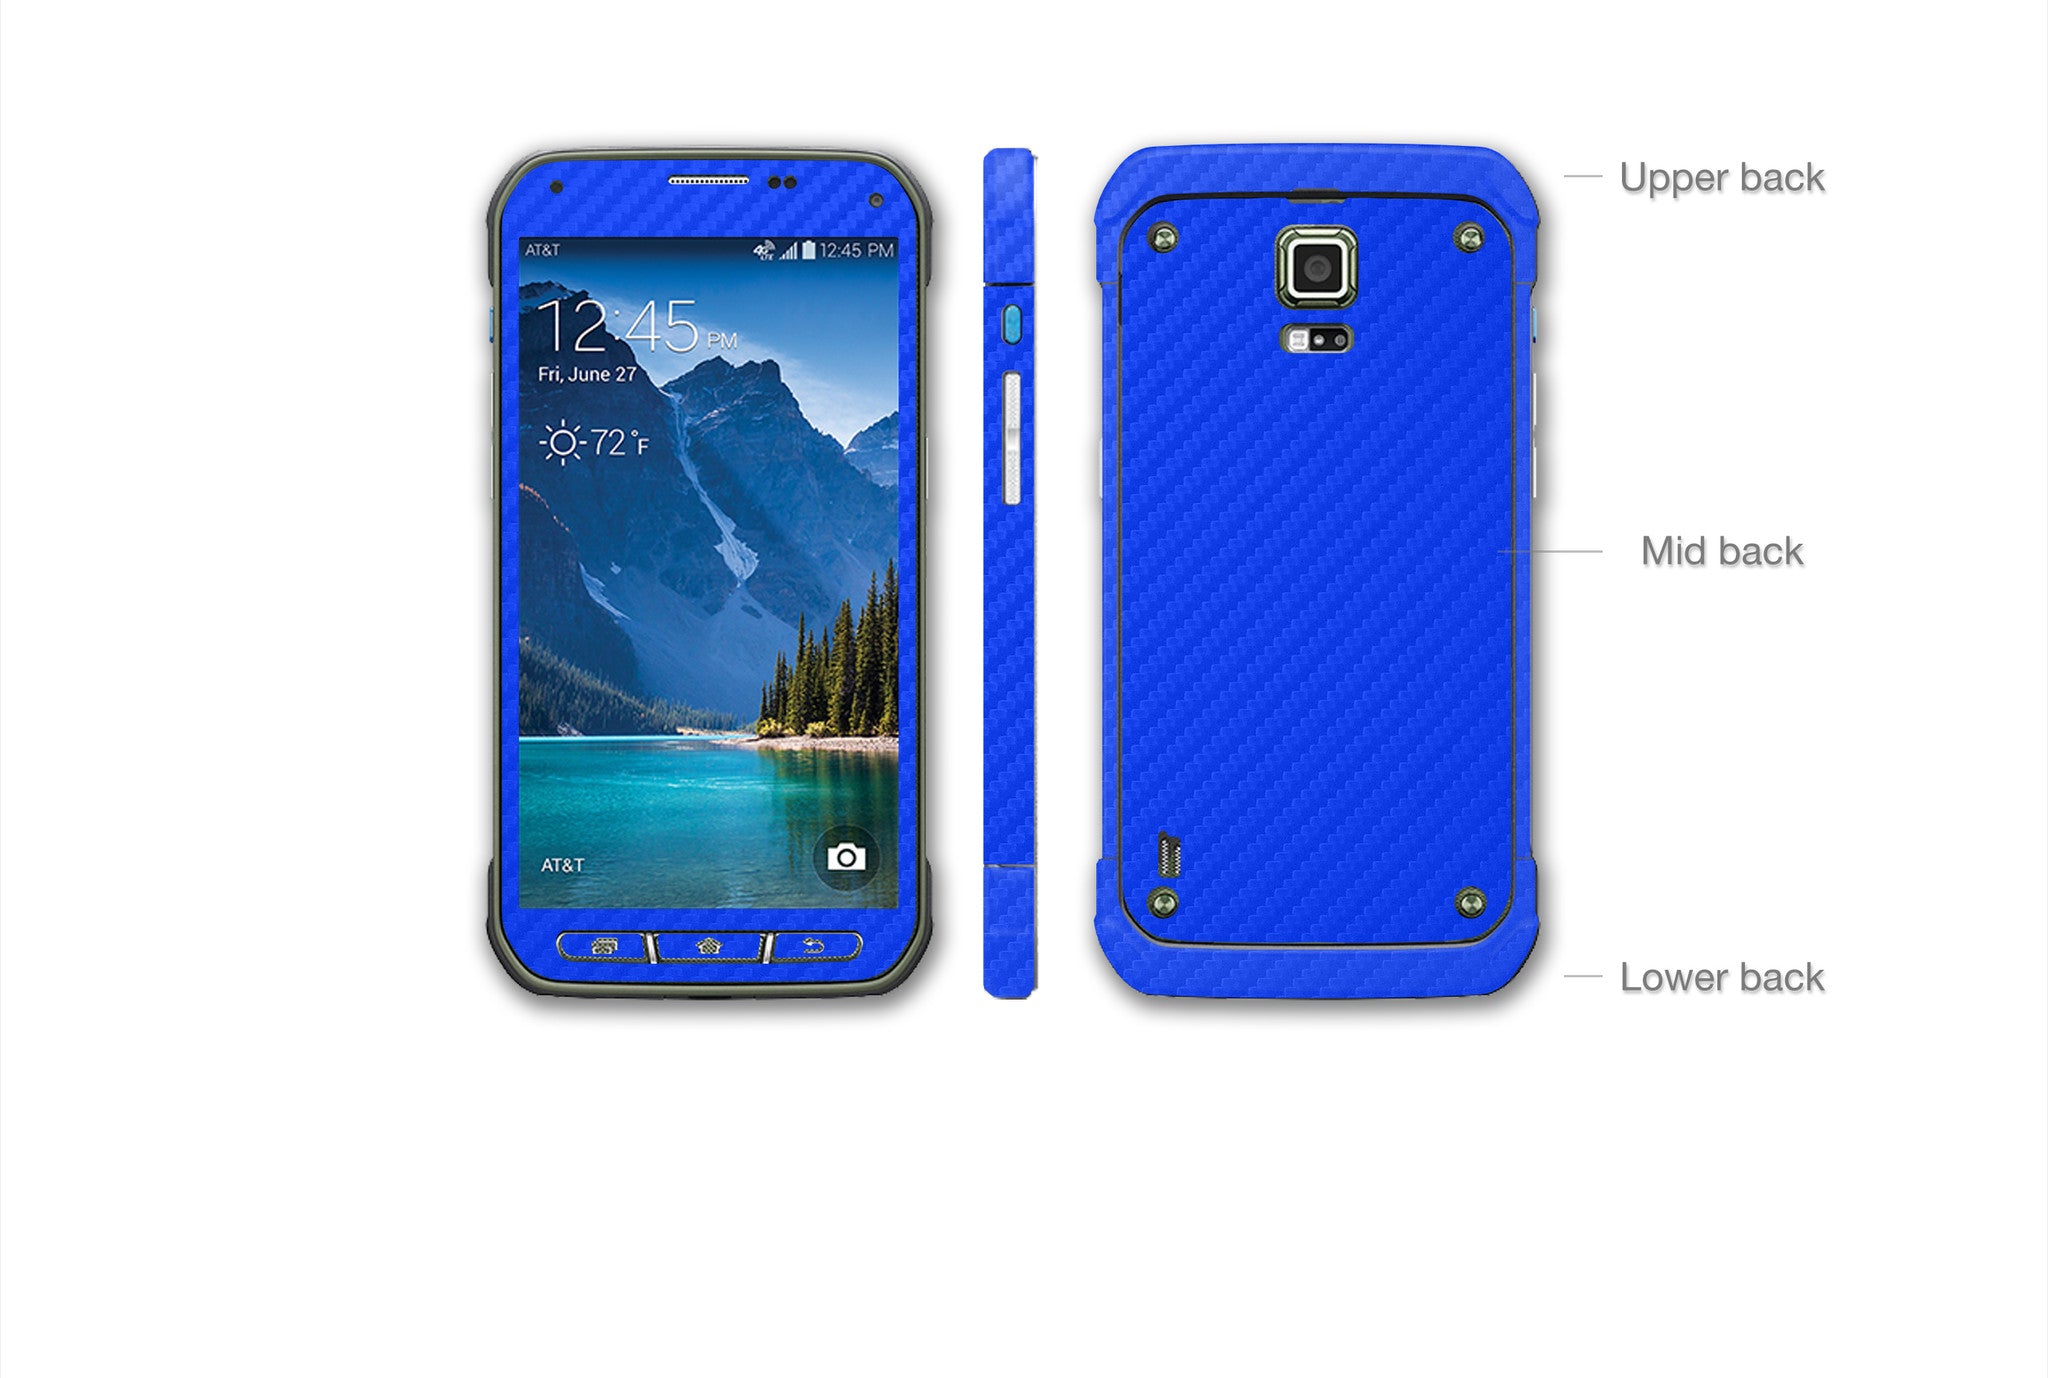 Carbon Fiber - Samsung S5 Active Skins | Stickerboy Skins for protecting your mobile device